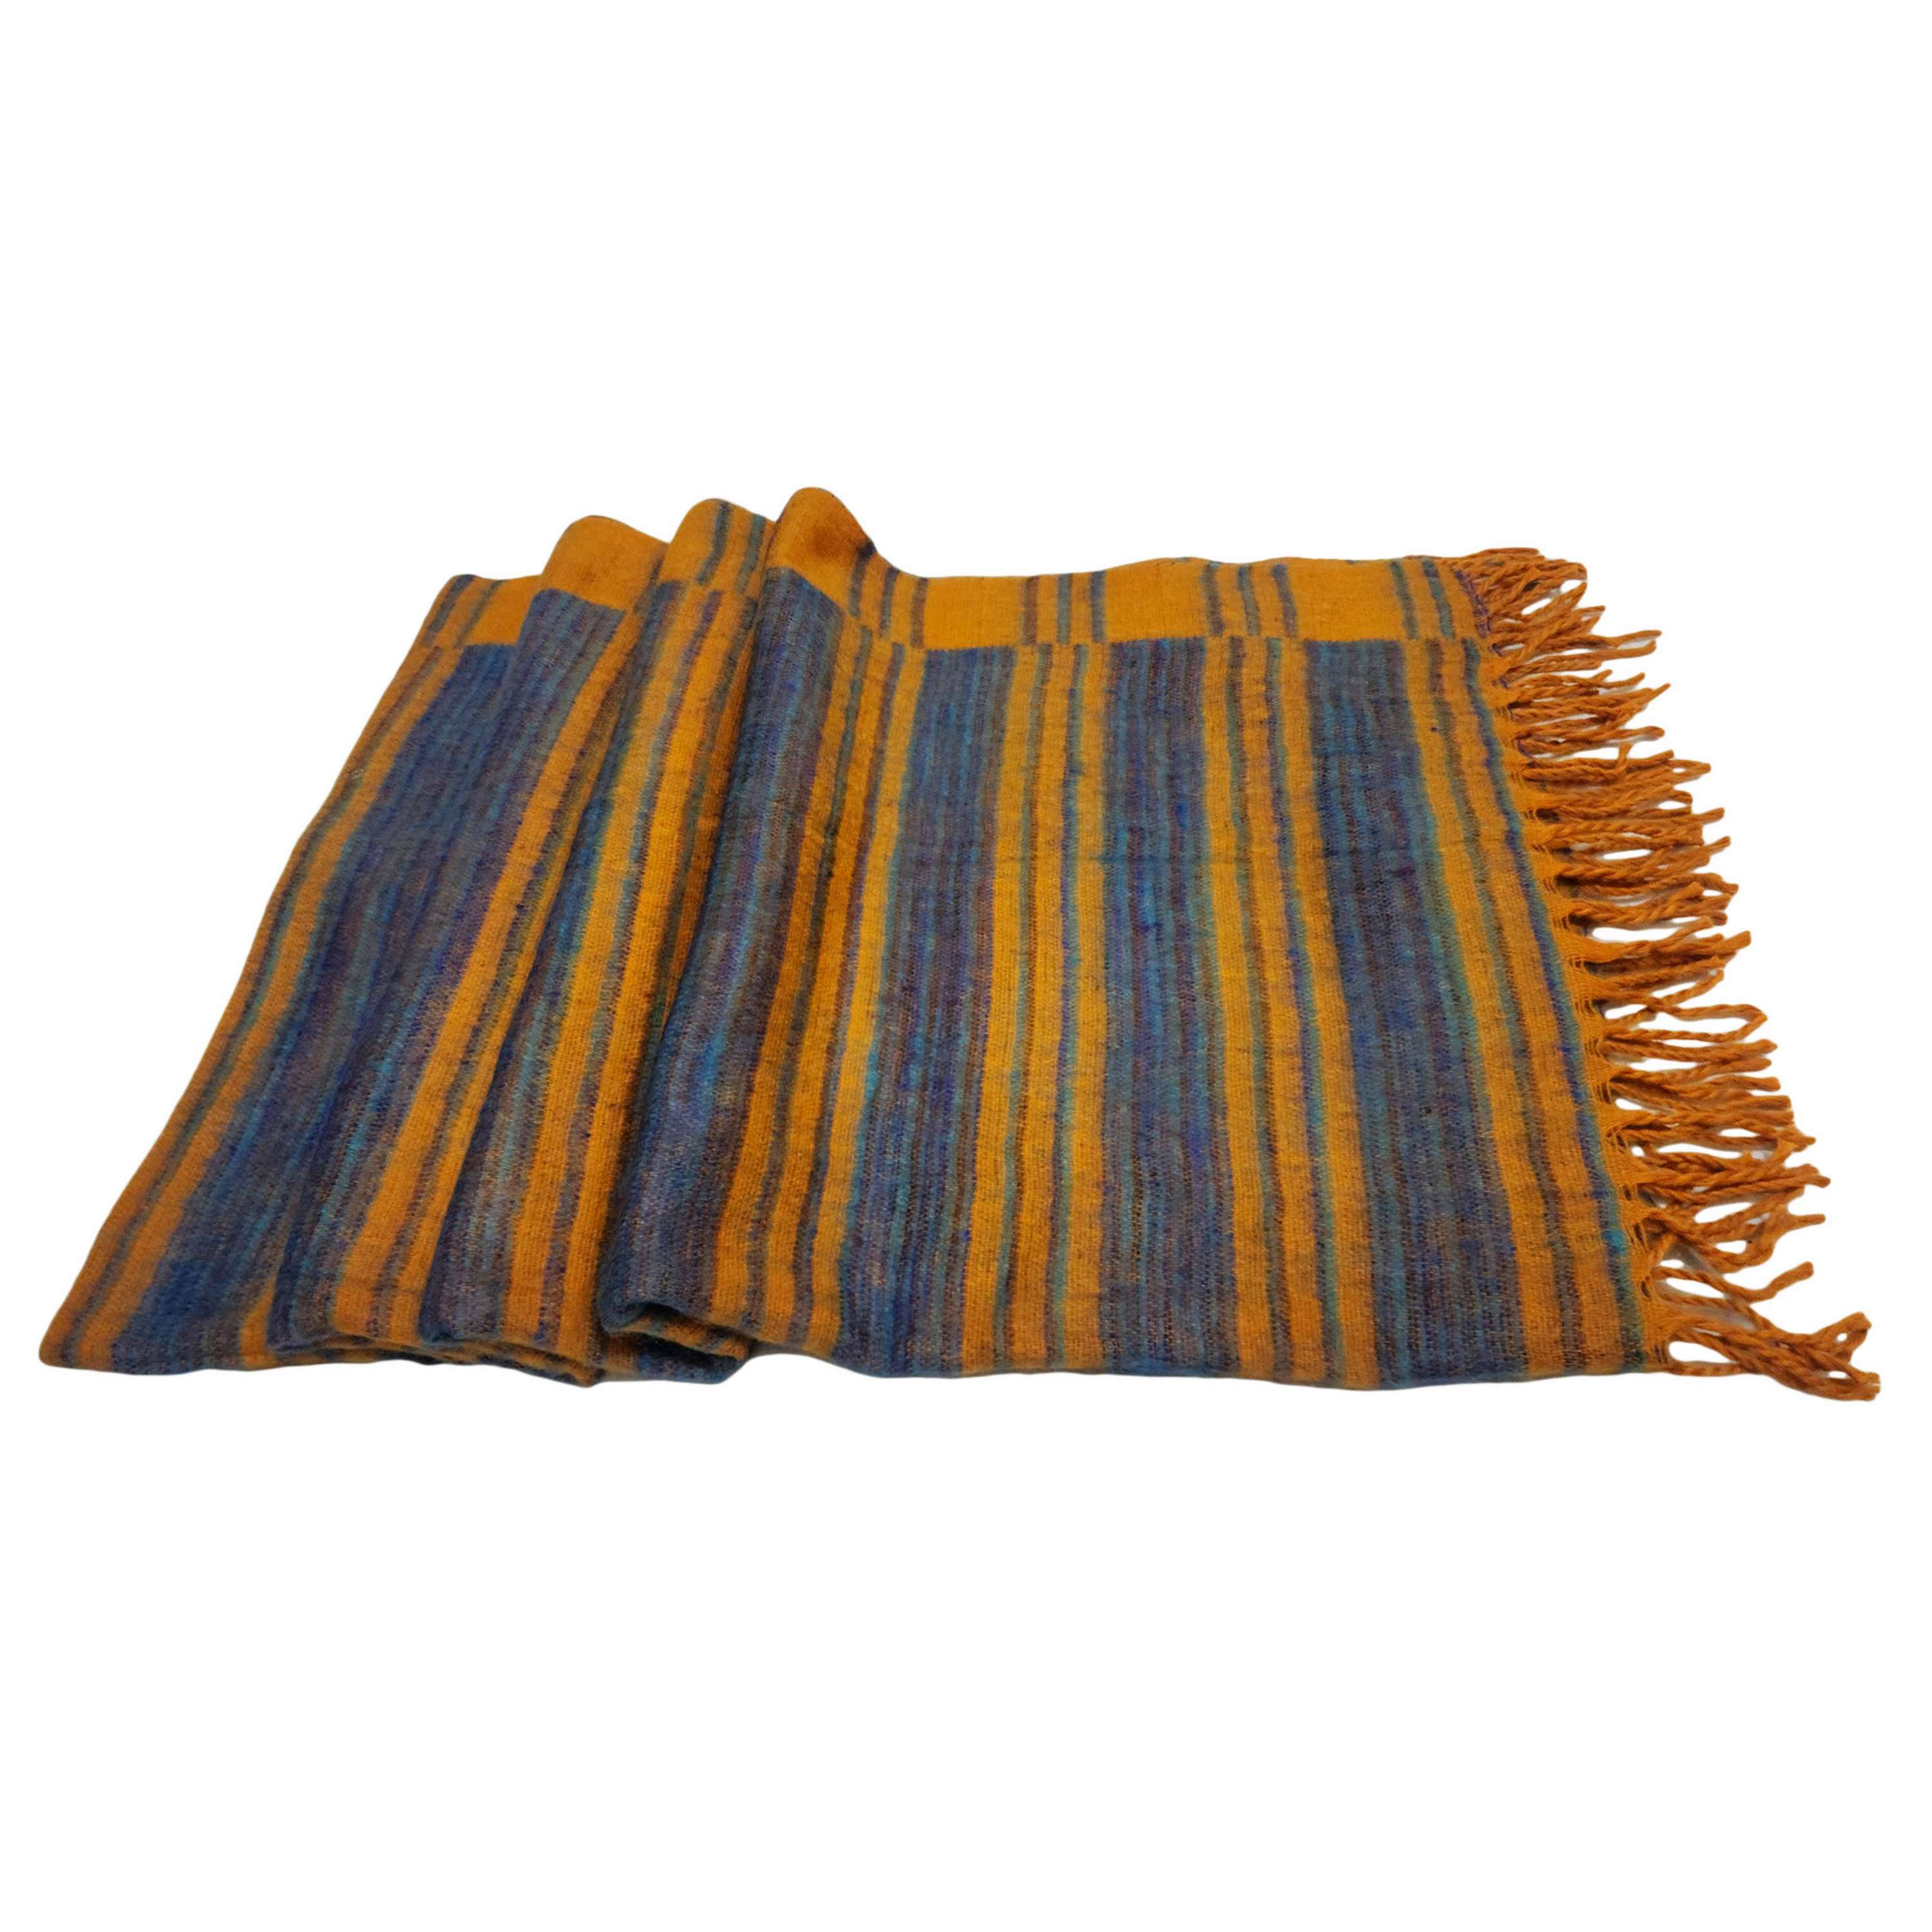 Tibet Shawl, Timeless Beauty: Acrylic Woolen Shawls For Every Wardrobe In Ochre Color And Stripes